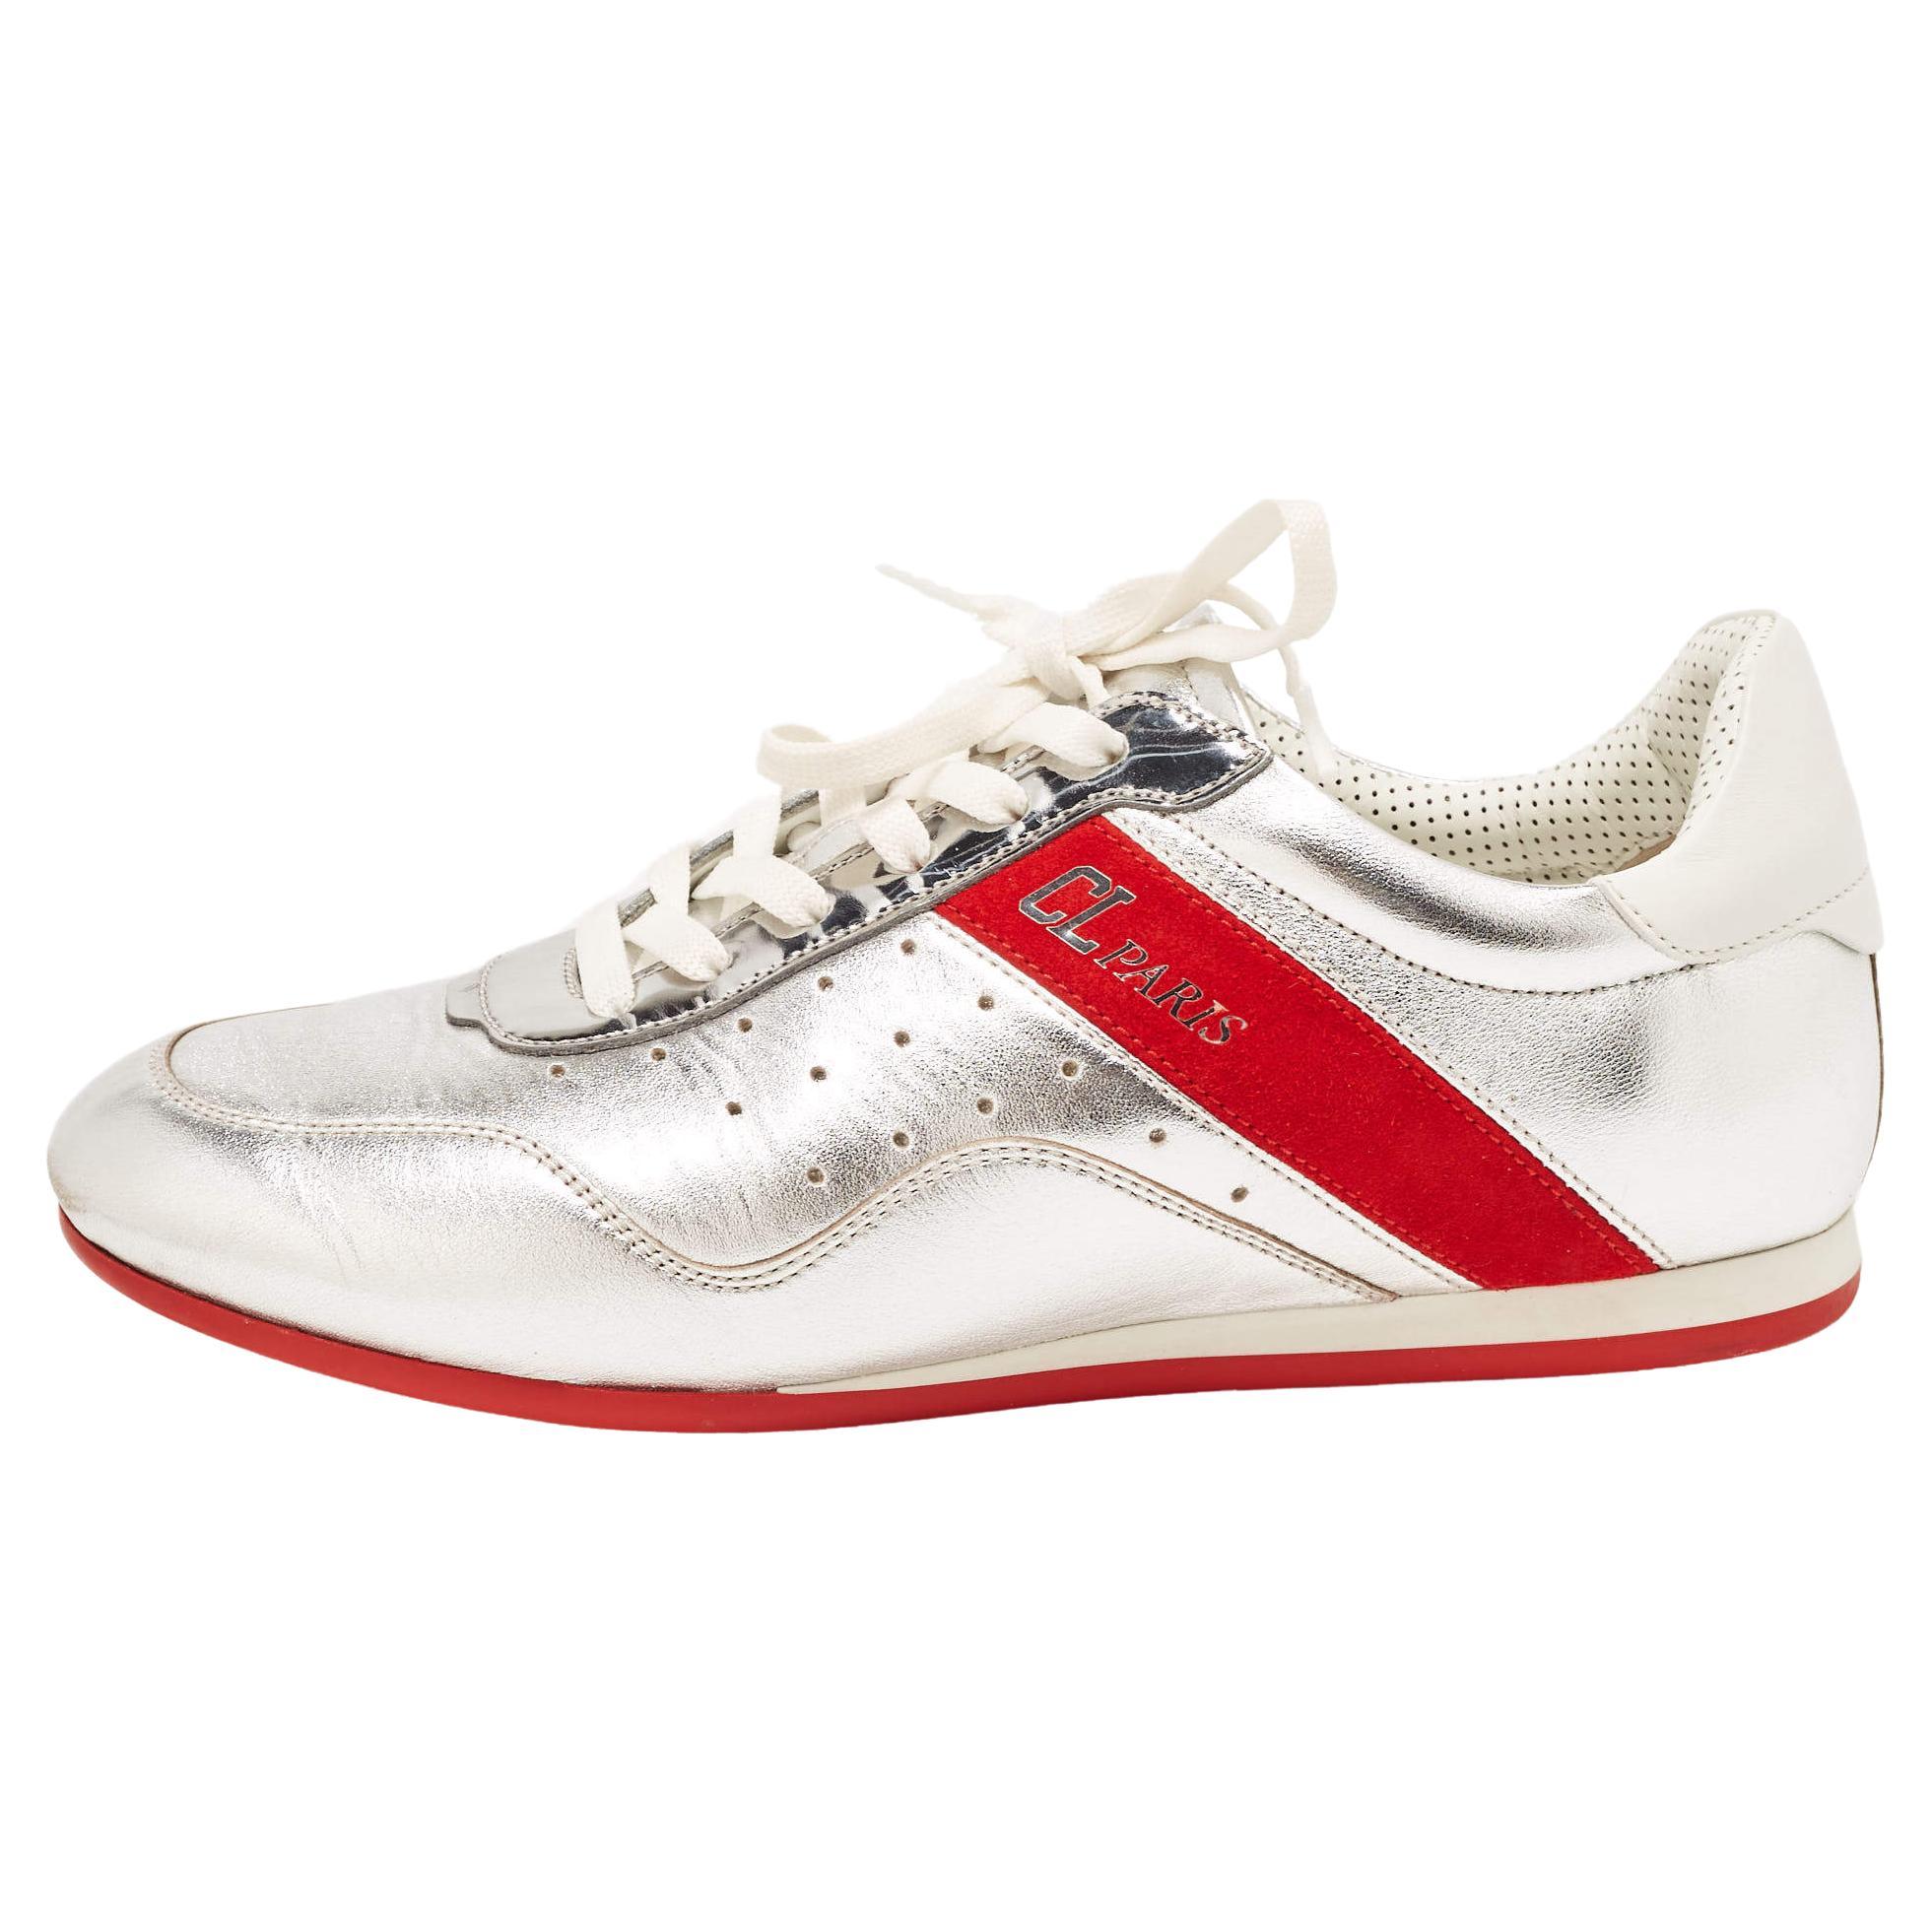 Christian Louboutin Silver/Red Leather and Suede My K Low Sneakers Size 36.5